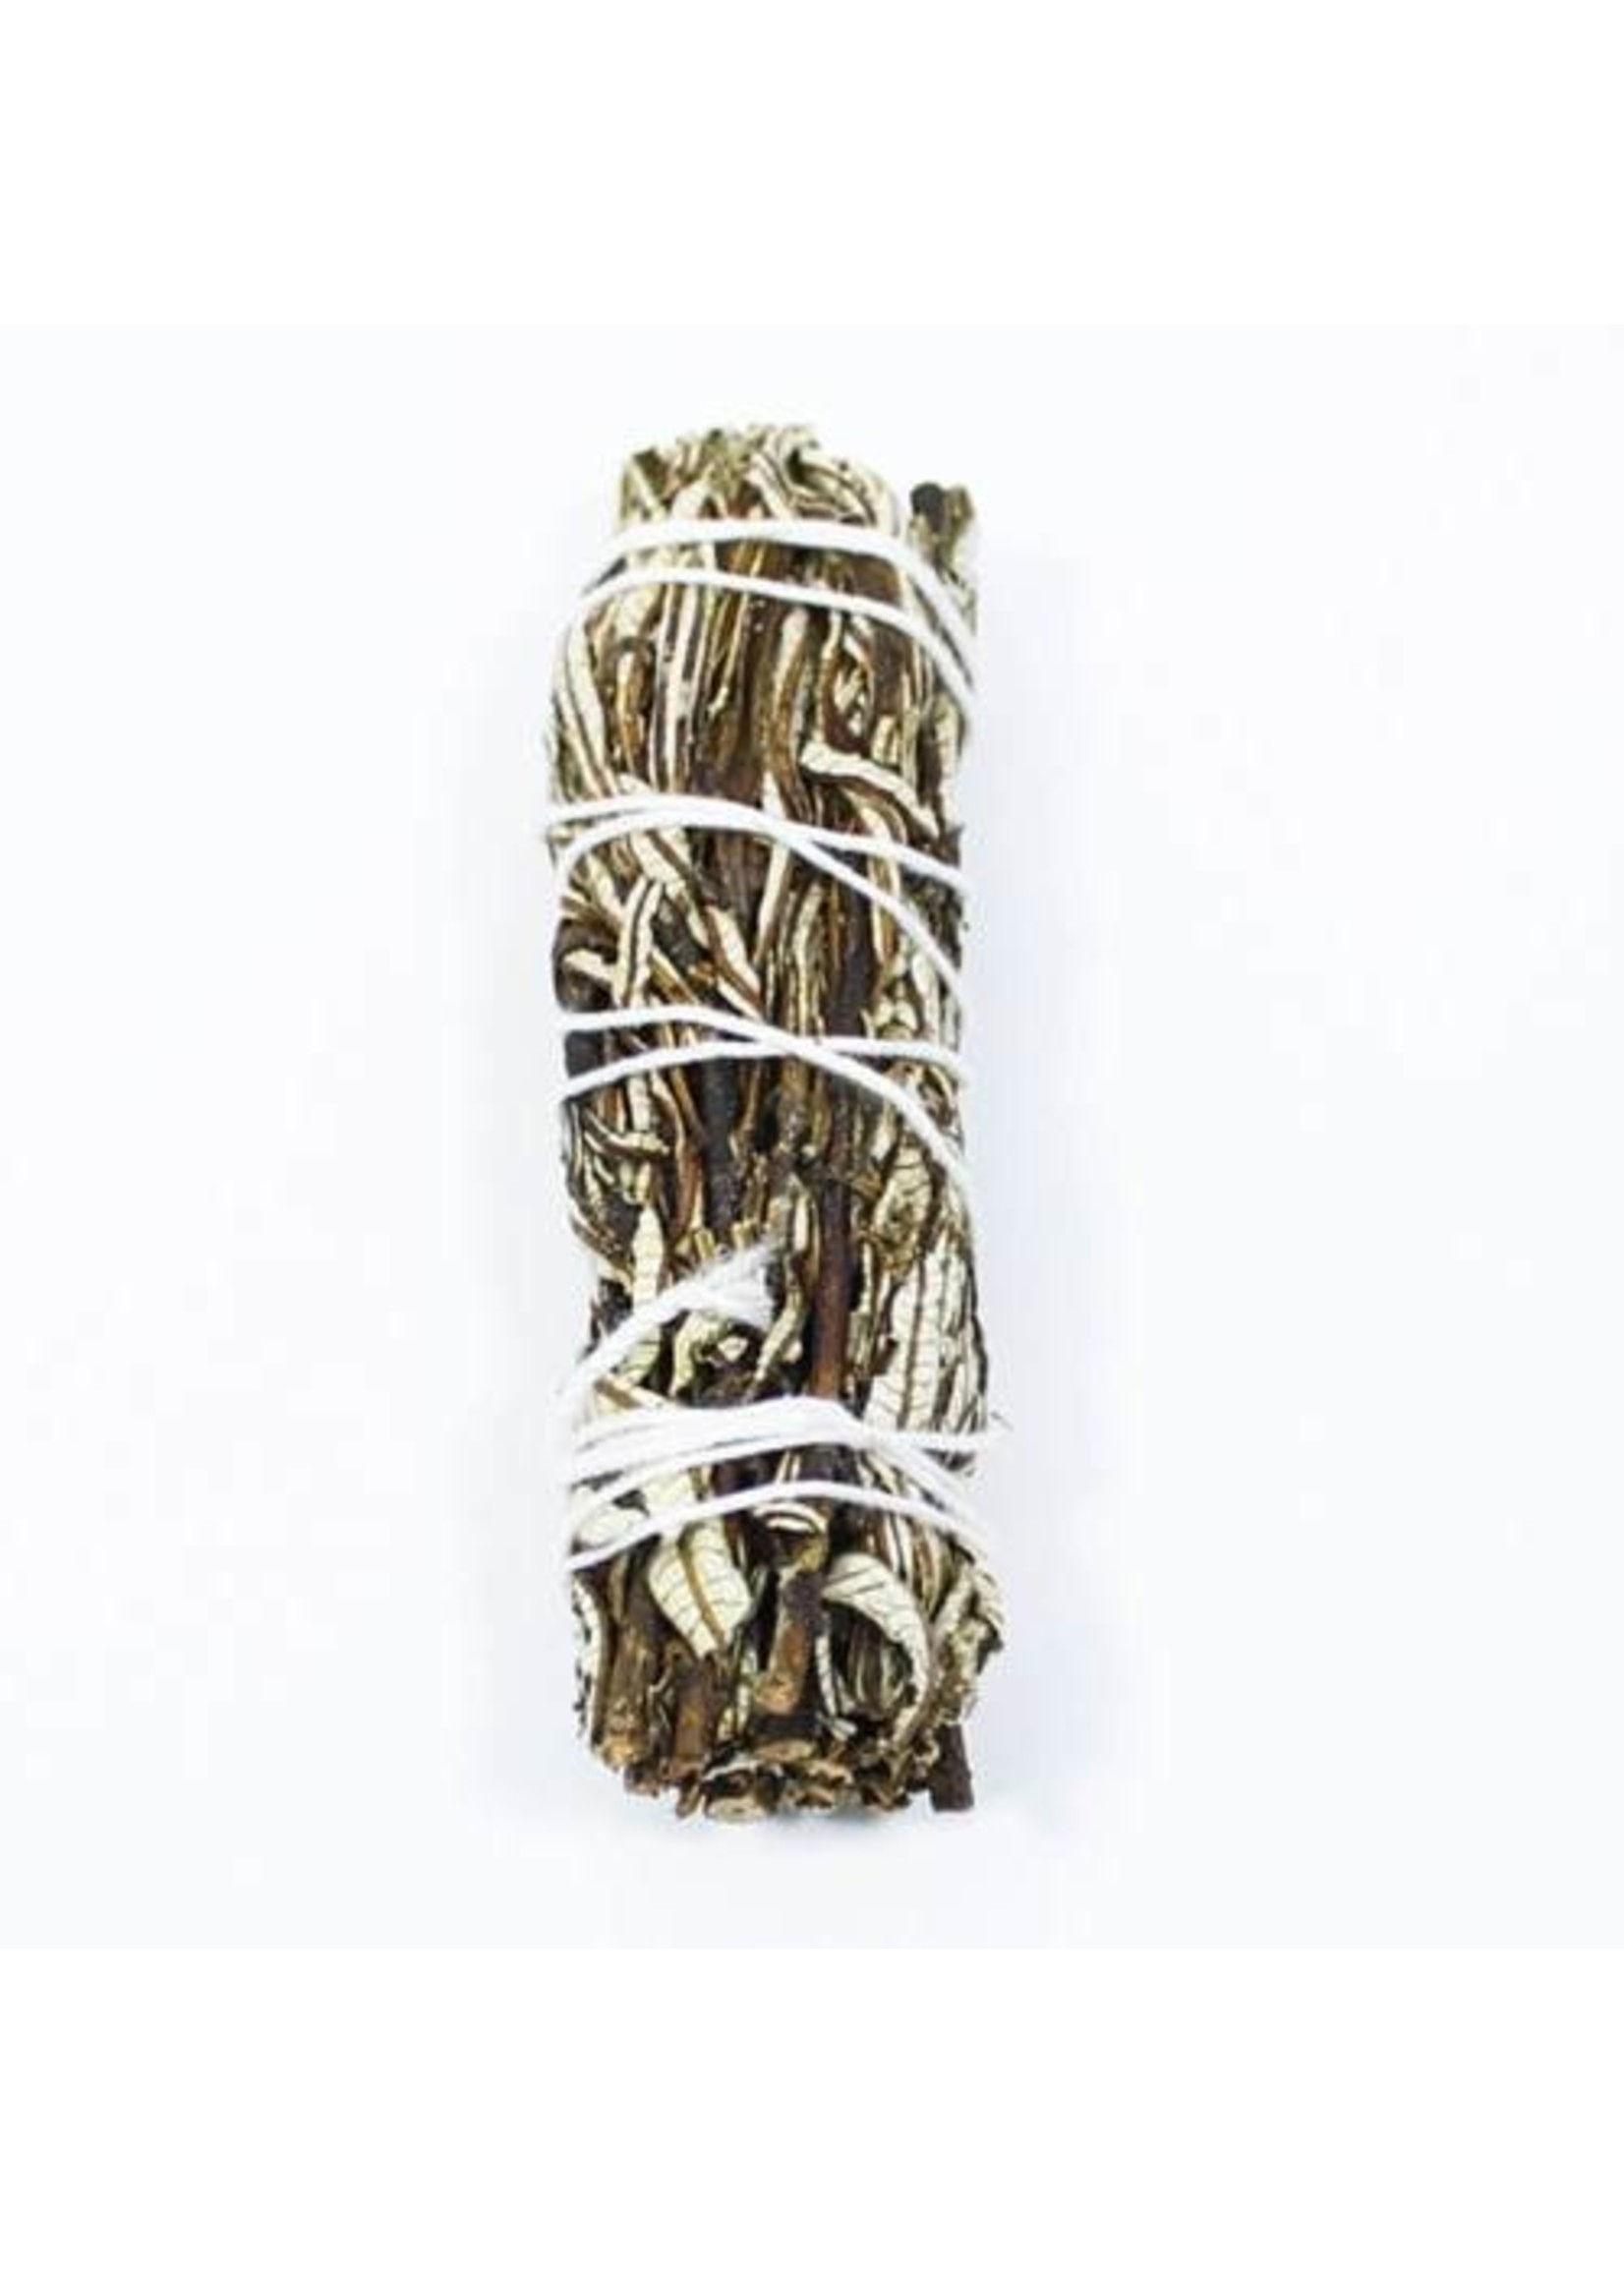 yerba-santa smudge stick, called holy herb, fills the air with delicious fragrance, offers protection against negative energies